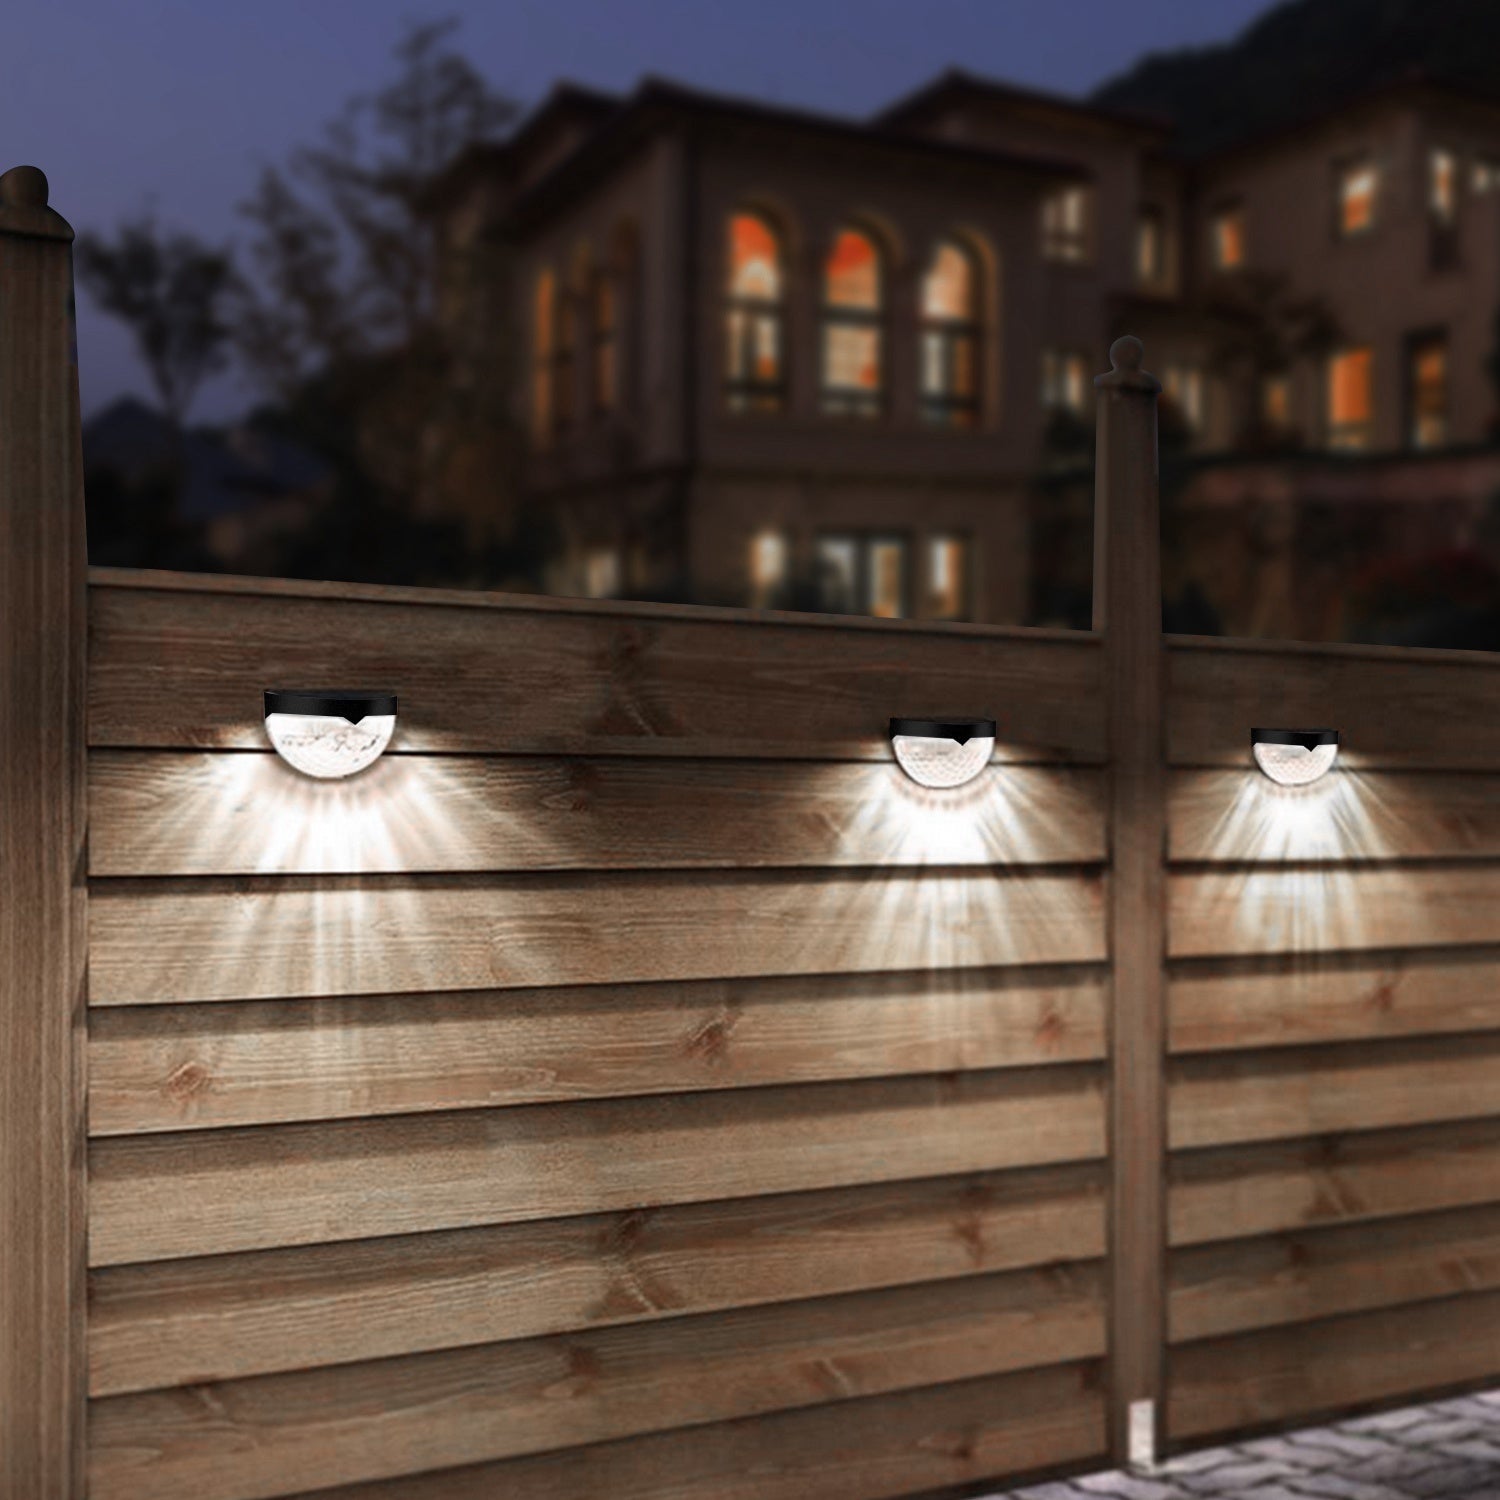 White Waterproof Lights for Outdoor